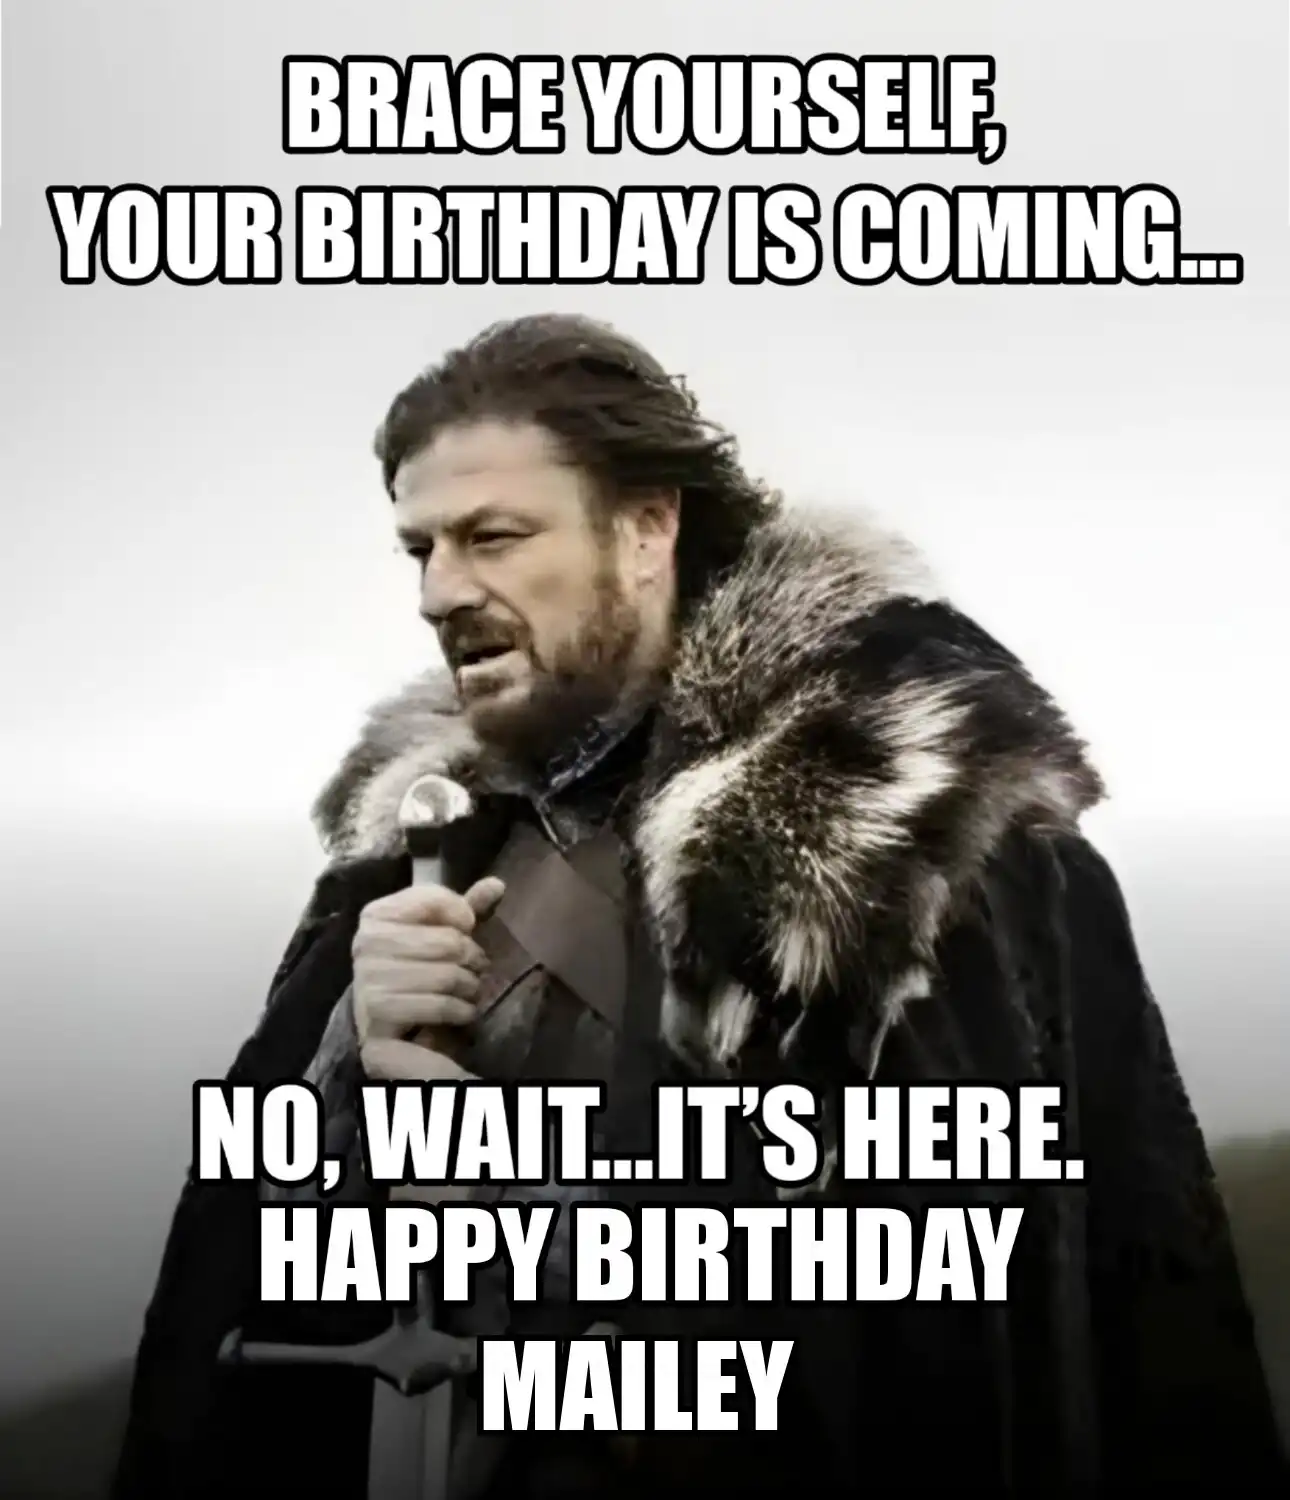 Happy Birthday Mailey Brace Yourself Your Birthday Is Coming Meme